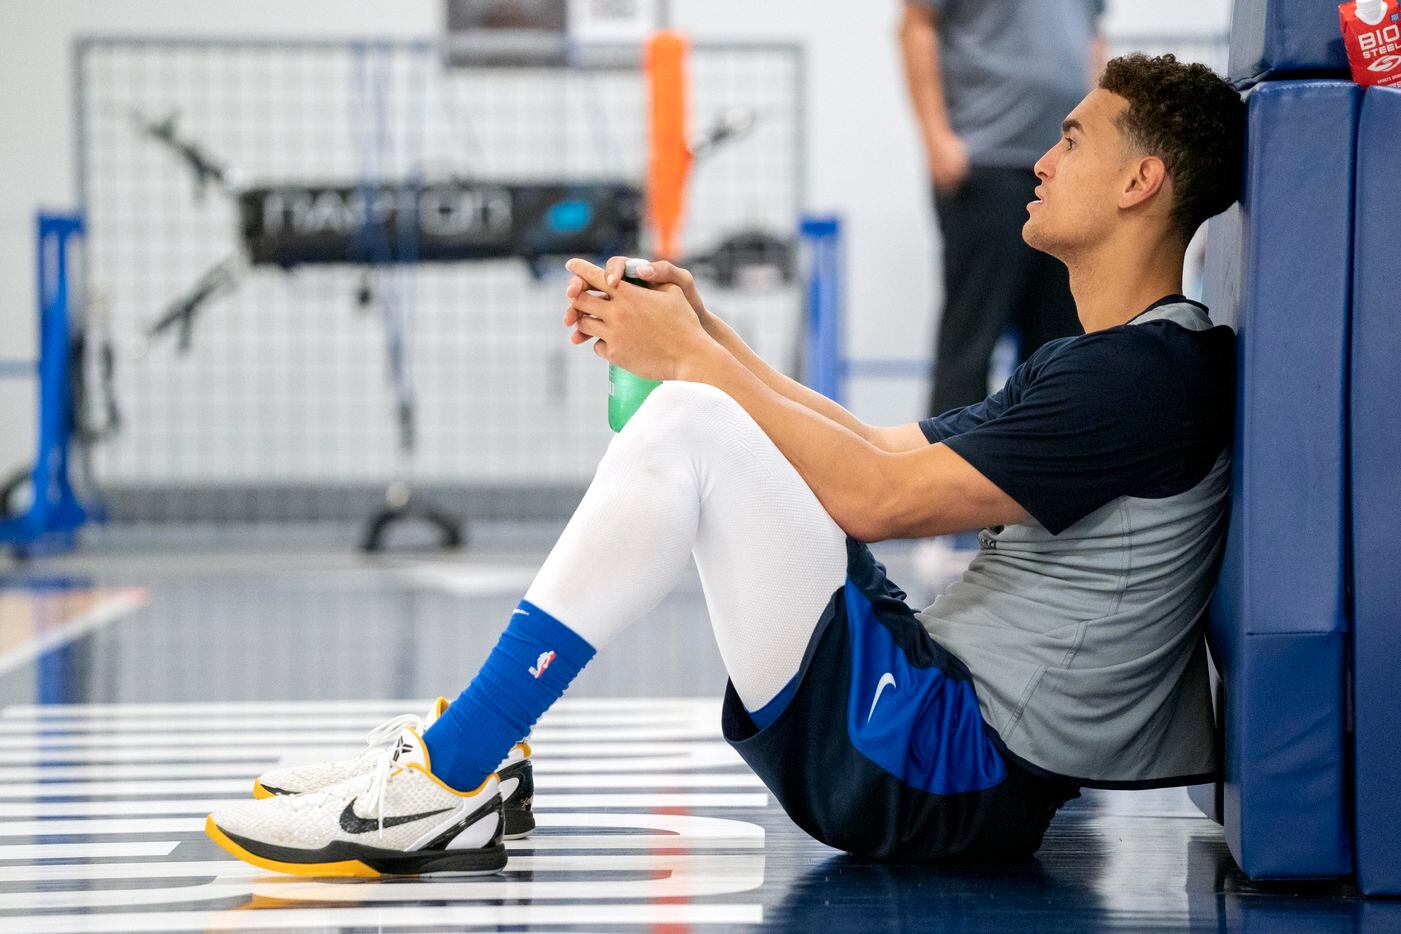 Dallas Mavericks center Dwight Powell (7) rests against the goal standard during a training camp practice Wednesday, September 29, 2021 at the Dallas Mavericks Training Center in Dallas. (Jeffrey McWhorter/Special Contributor)